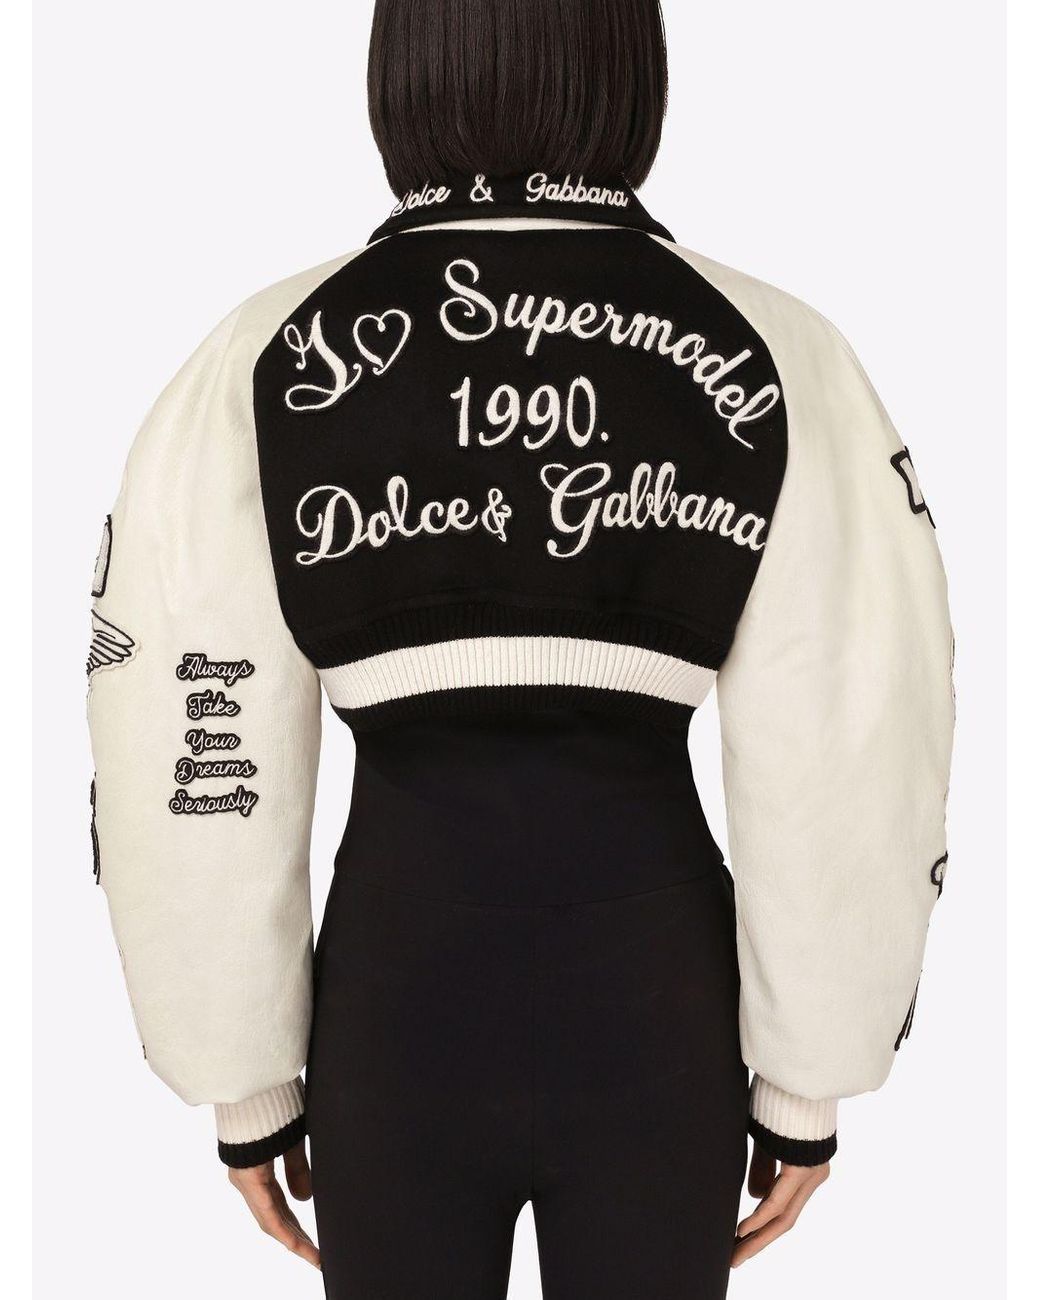 Dolce & Gabbana Cropped Bomber Jacket in Black | Lyst